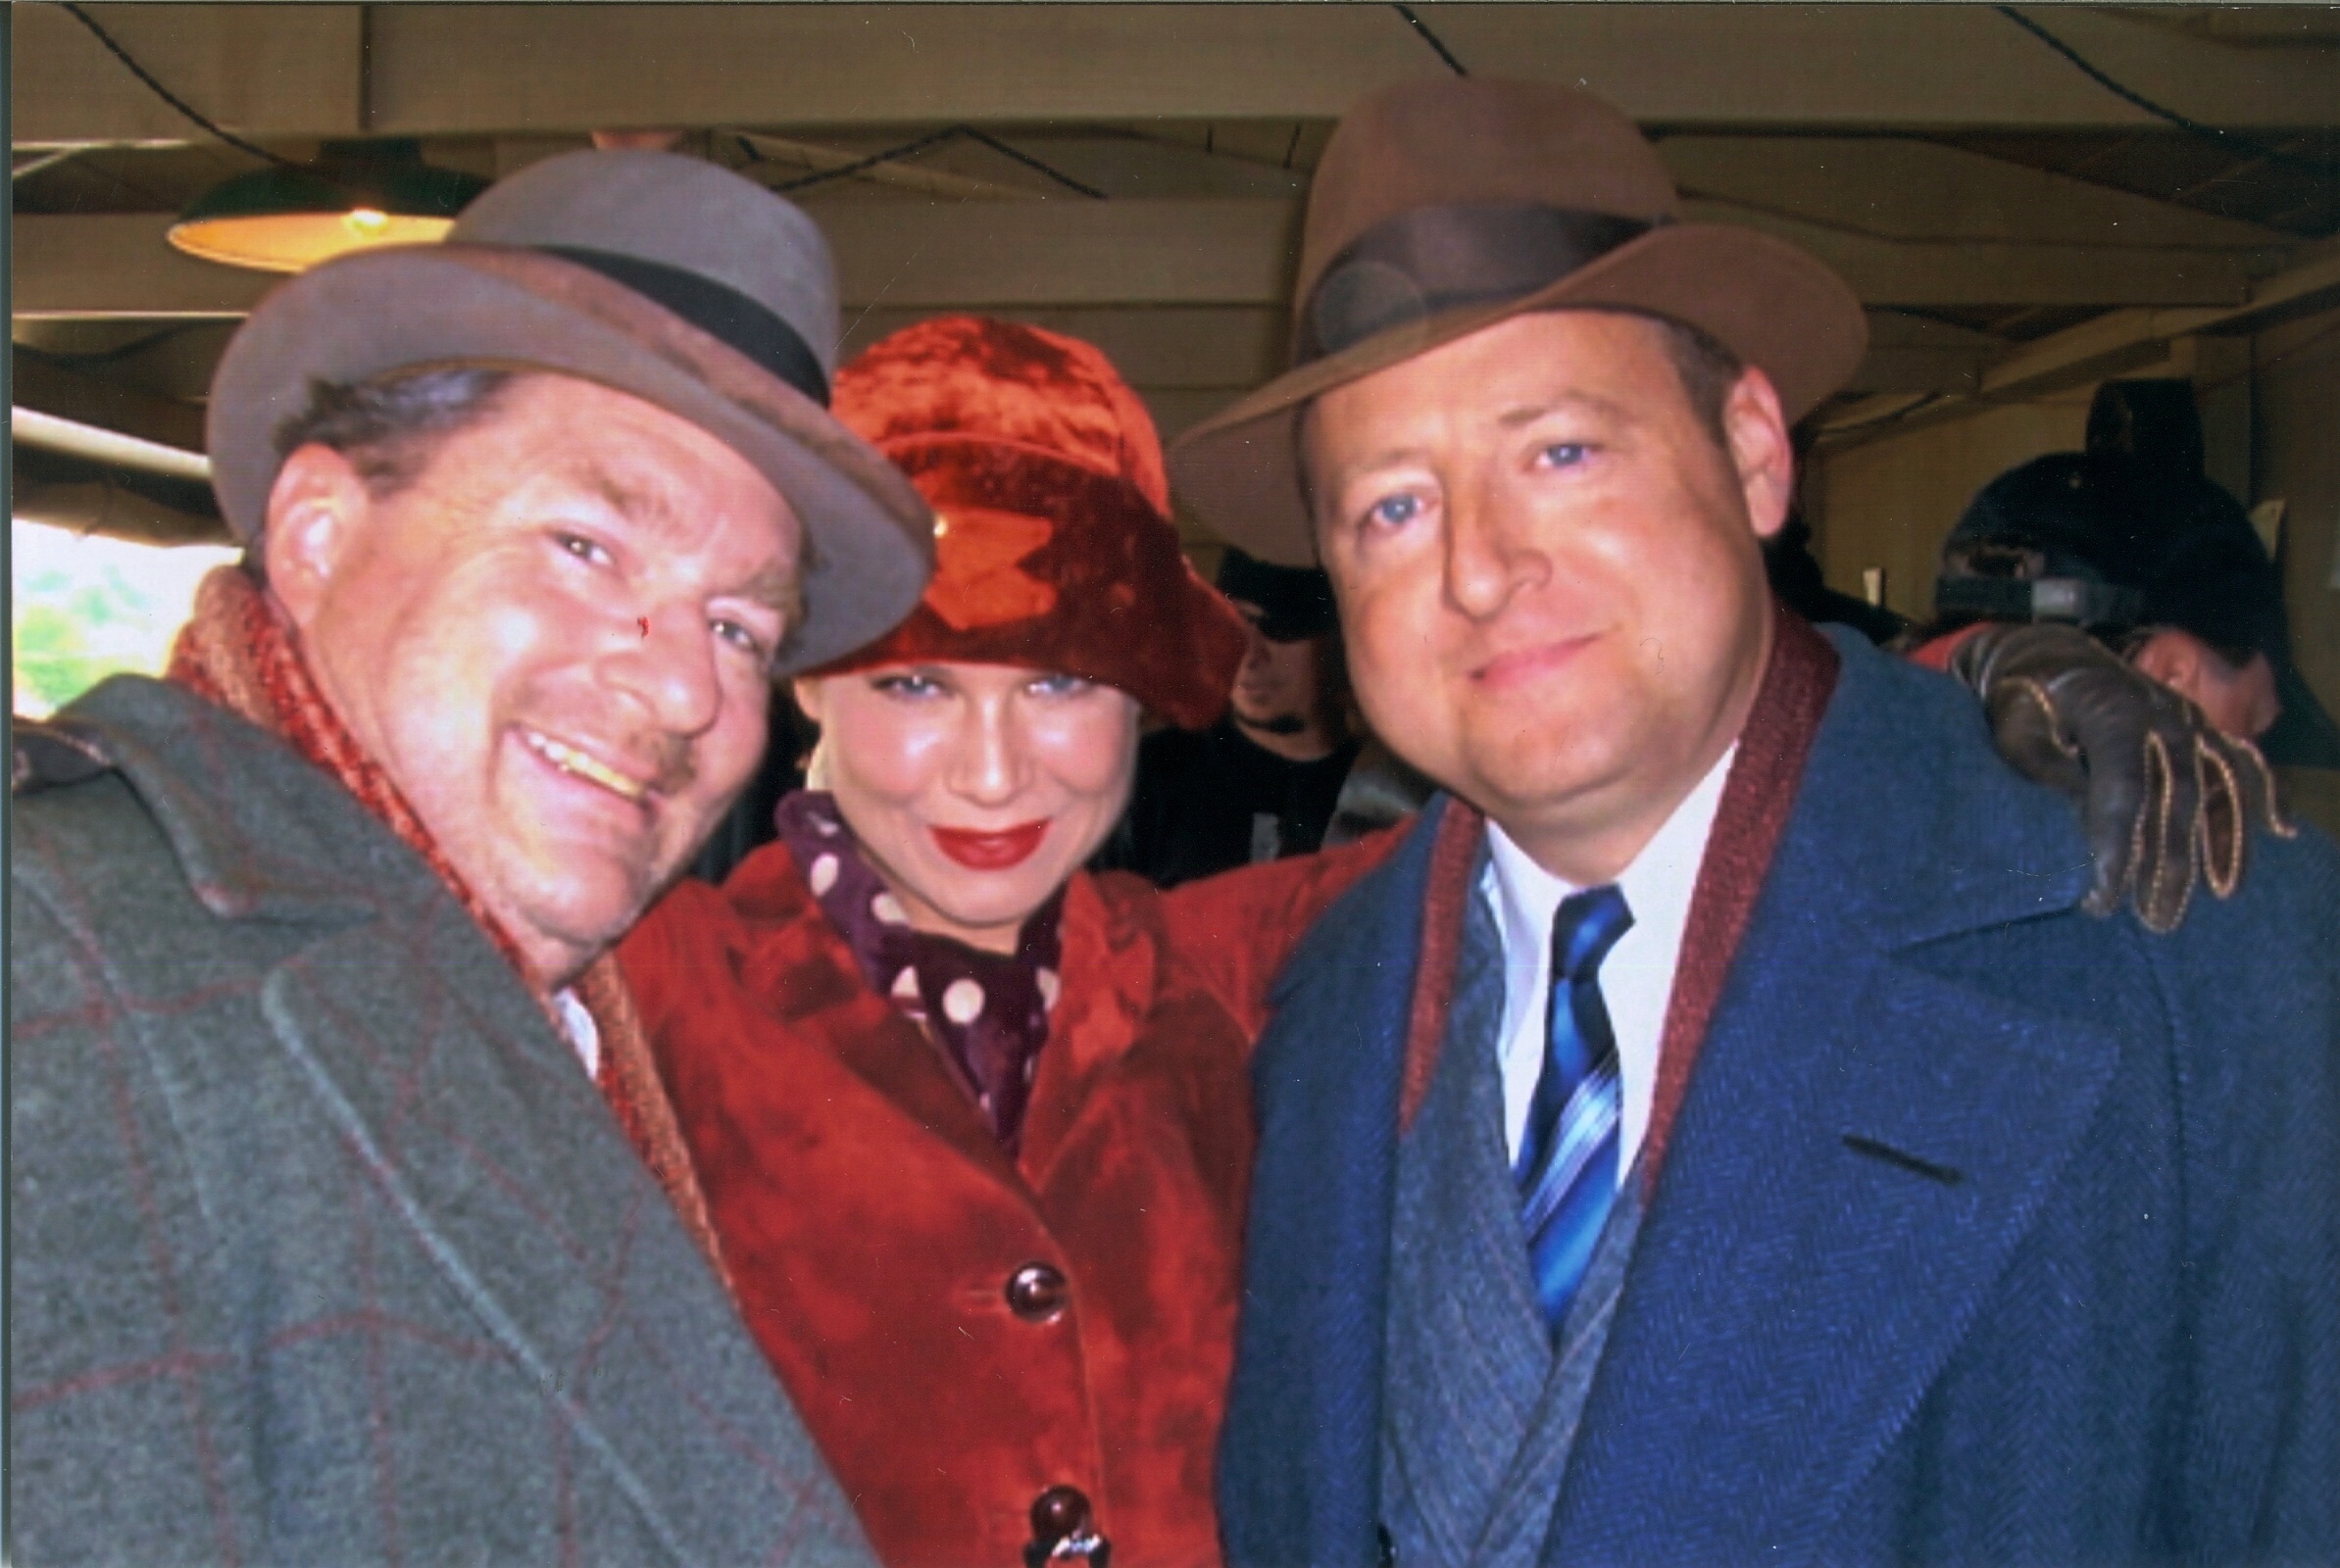 LEATHERHEADS: Patt Noday: (right) on-location with Stephen Root, Renee Zellweger in Charlotte, NC filming the screwball football comedy, 